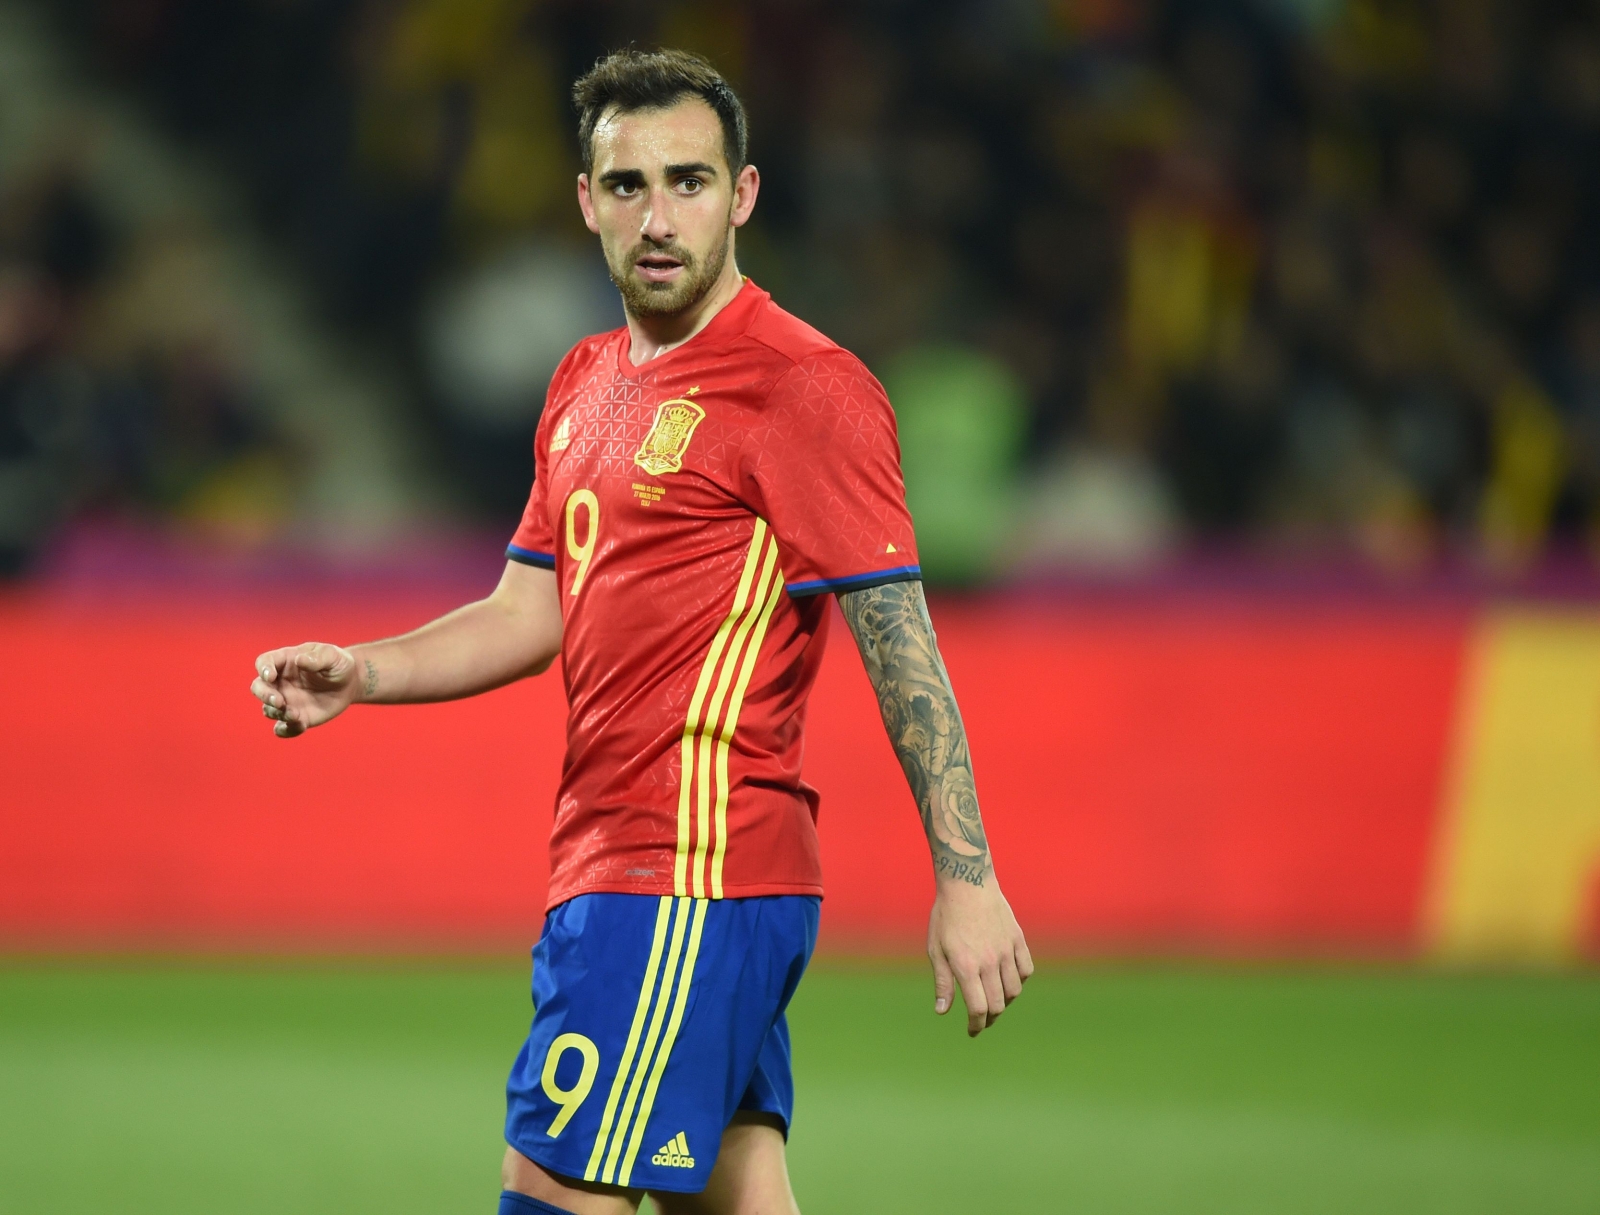 PACO Alcacer